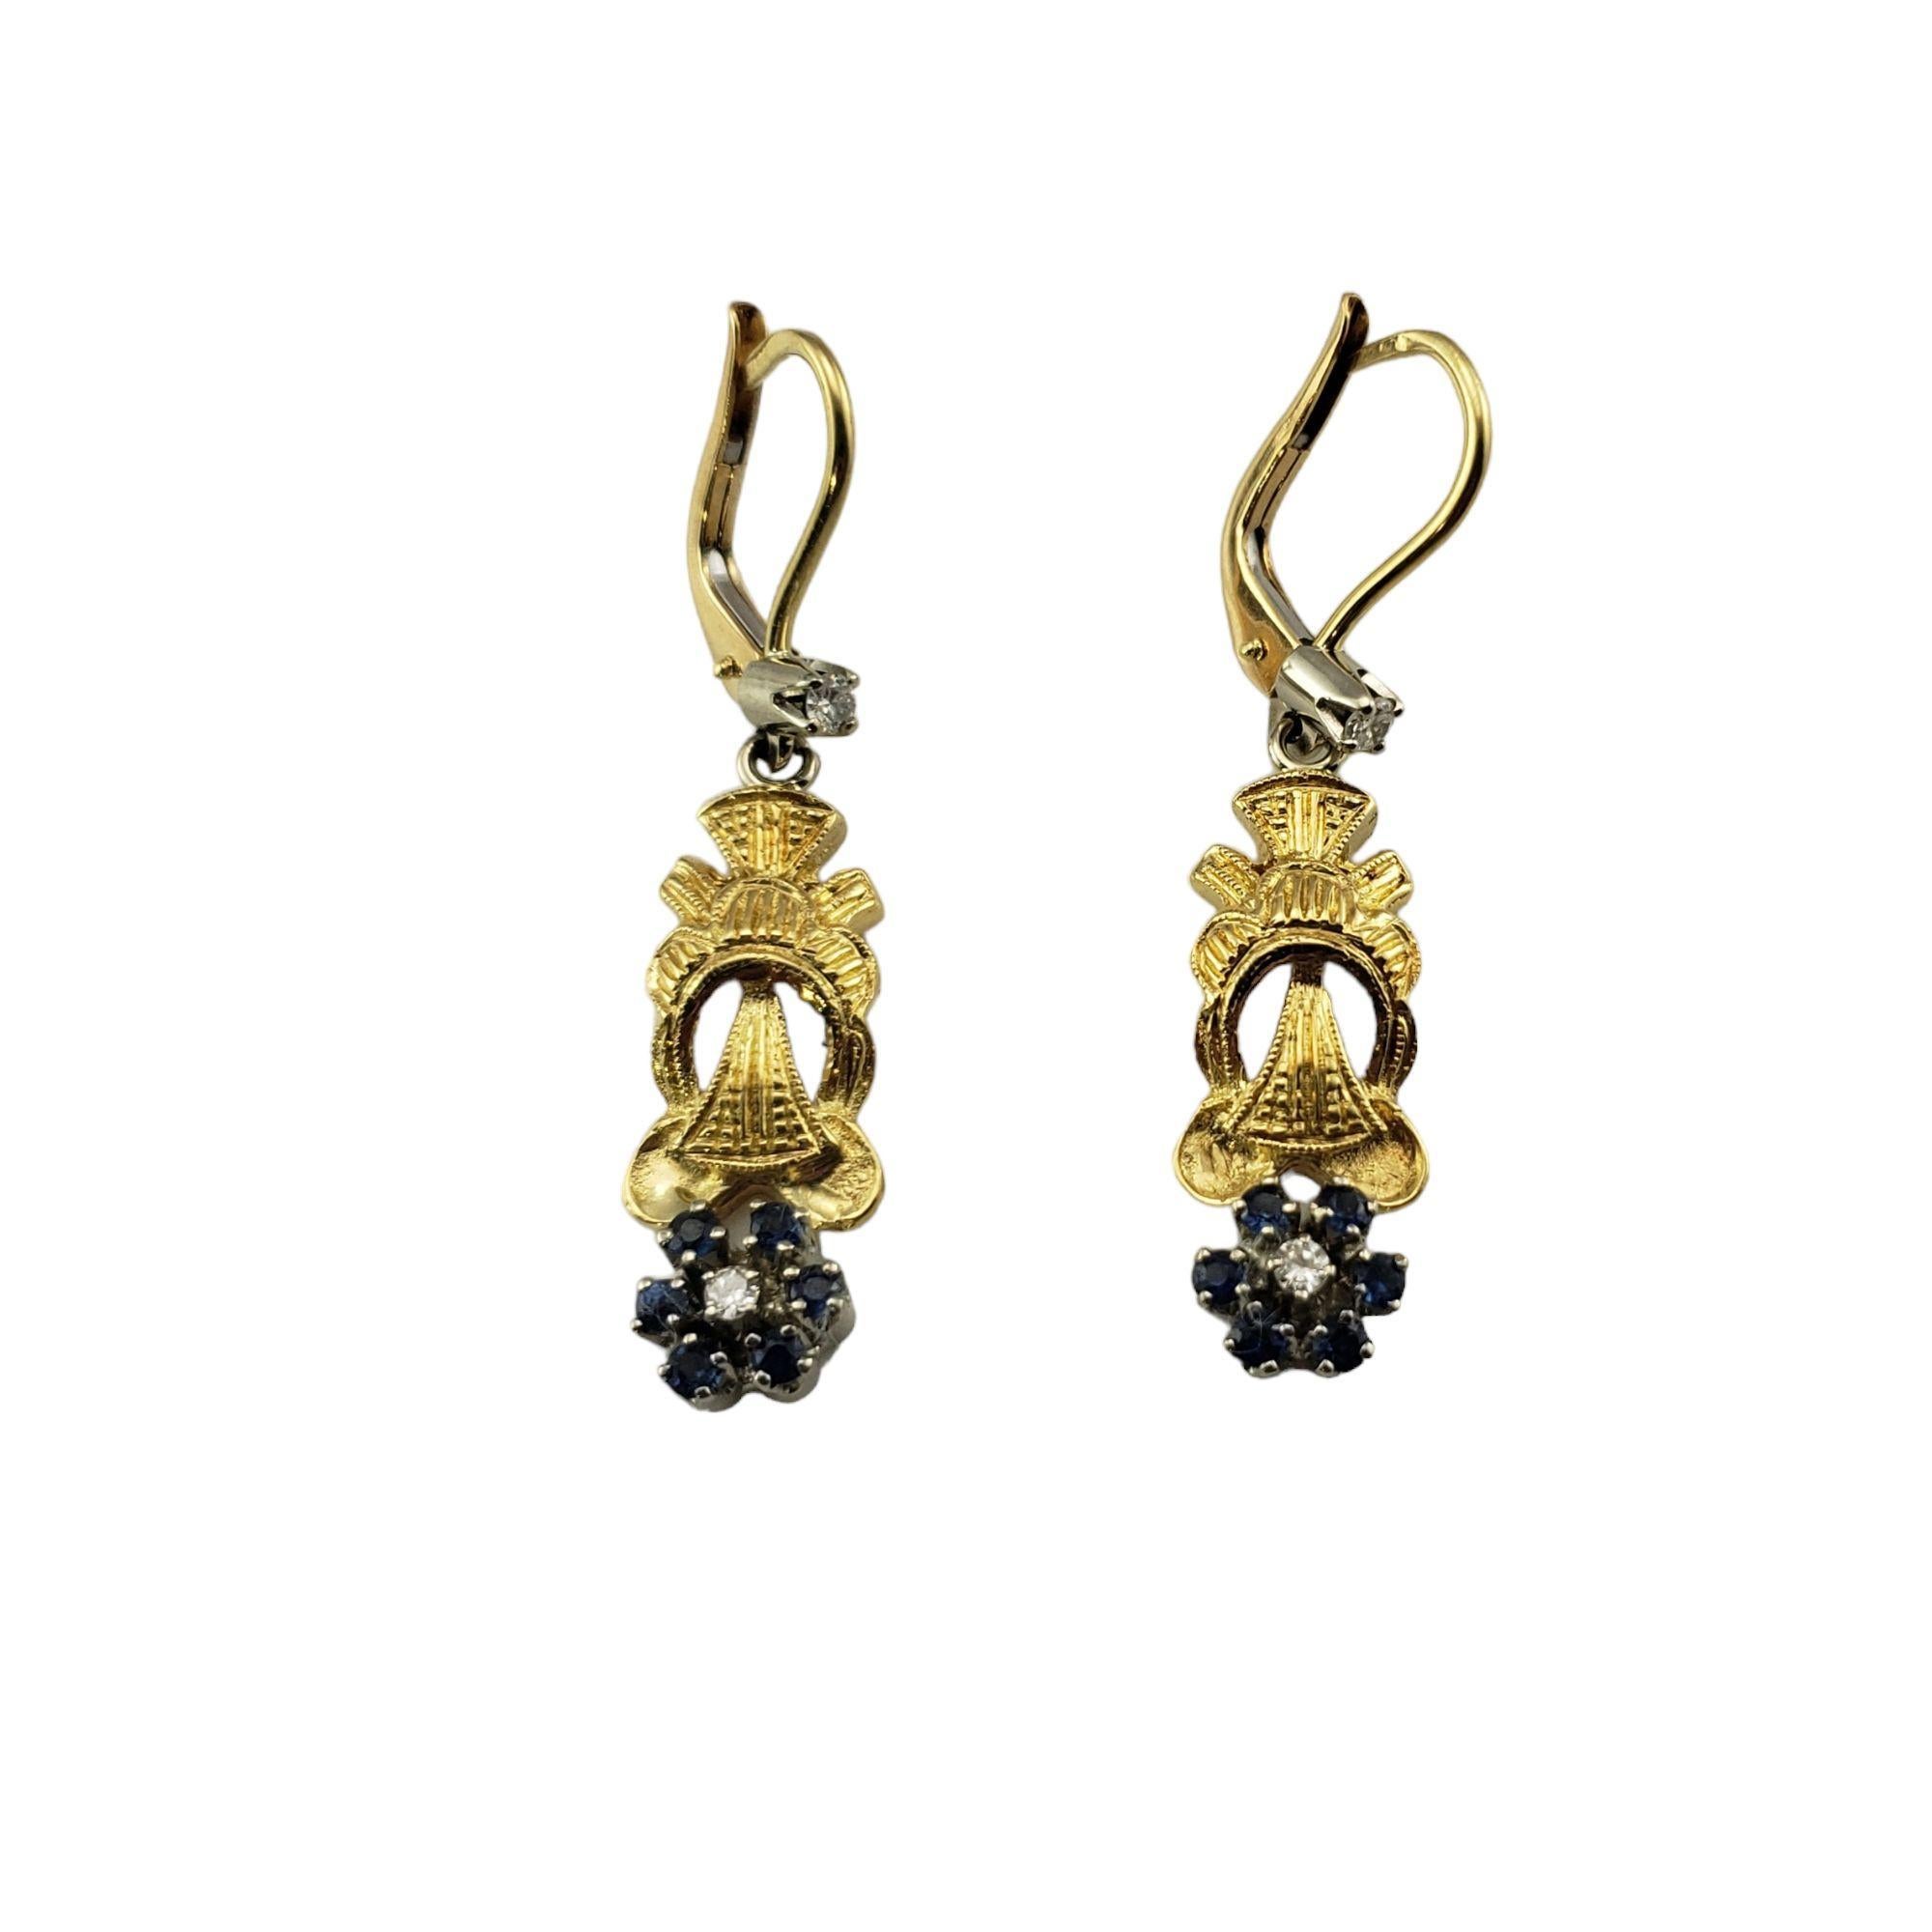 18 Karat Yellow and White Gold Sapphire and Diamond Dangle Earrings JAGi Certified-

These elegant drop earrings each feature six round blue sapphires and two round brilliant cut diamonds set in beautifully detailed 18K yellow and white